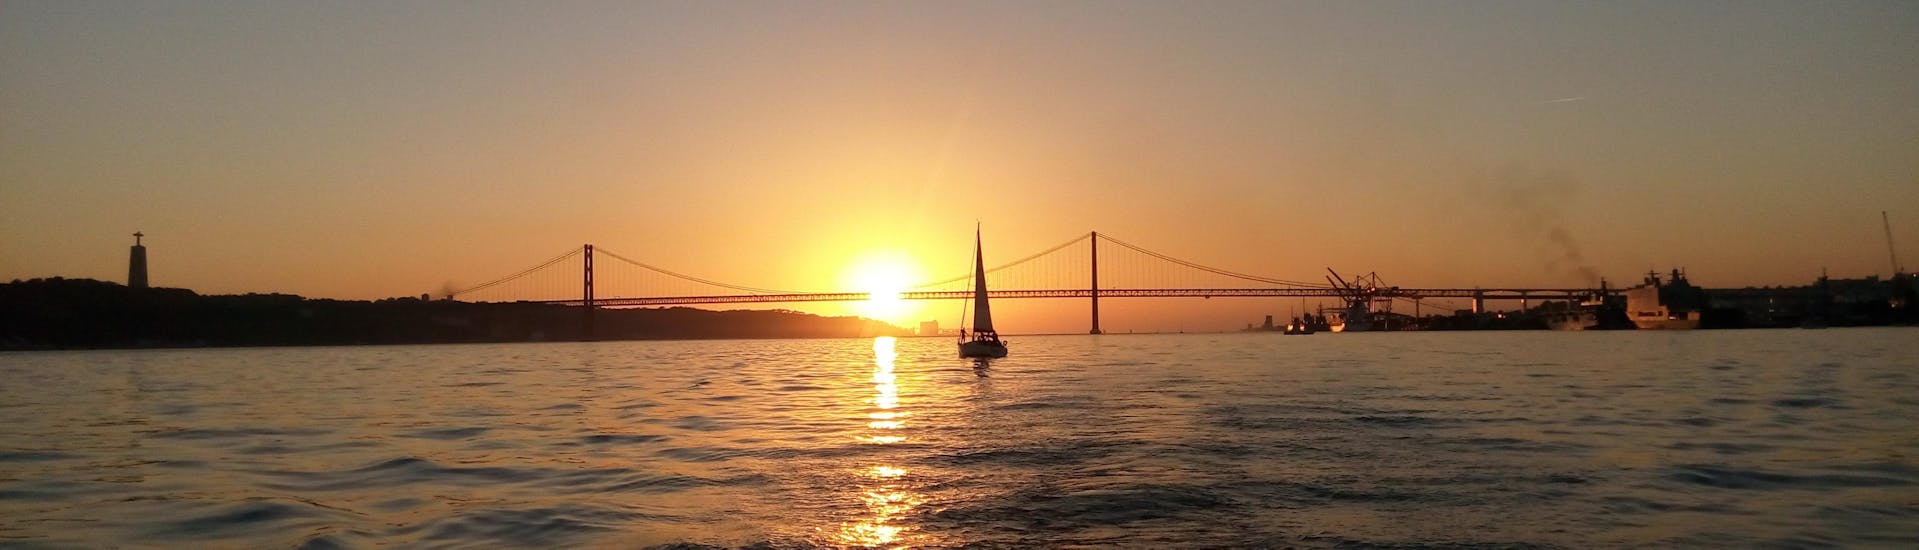 A boat in the water during the Sunset Sail tour on the Tagus